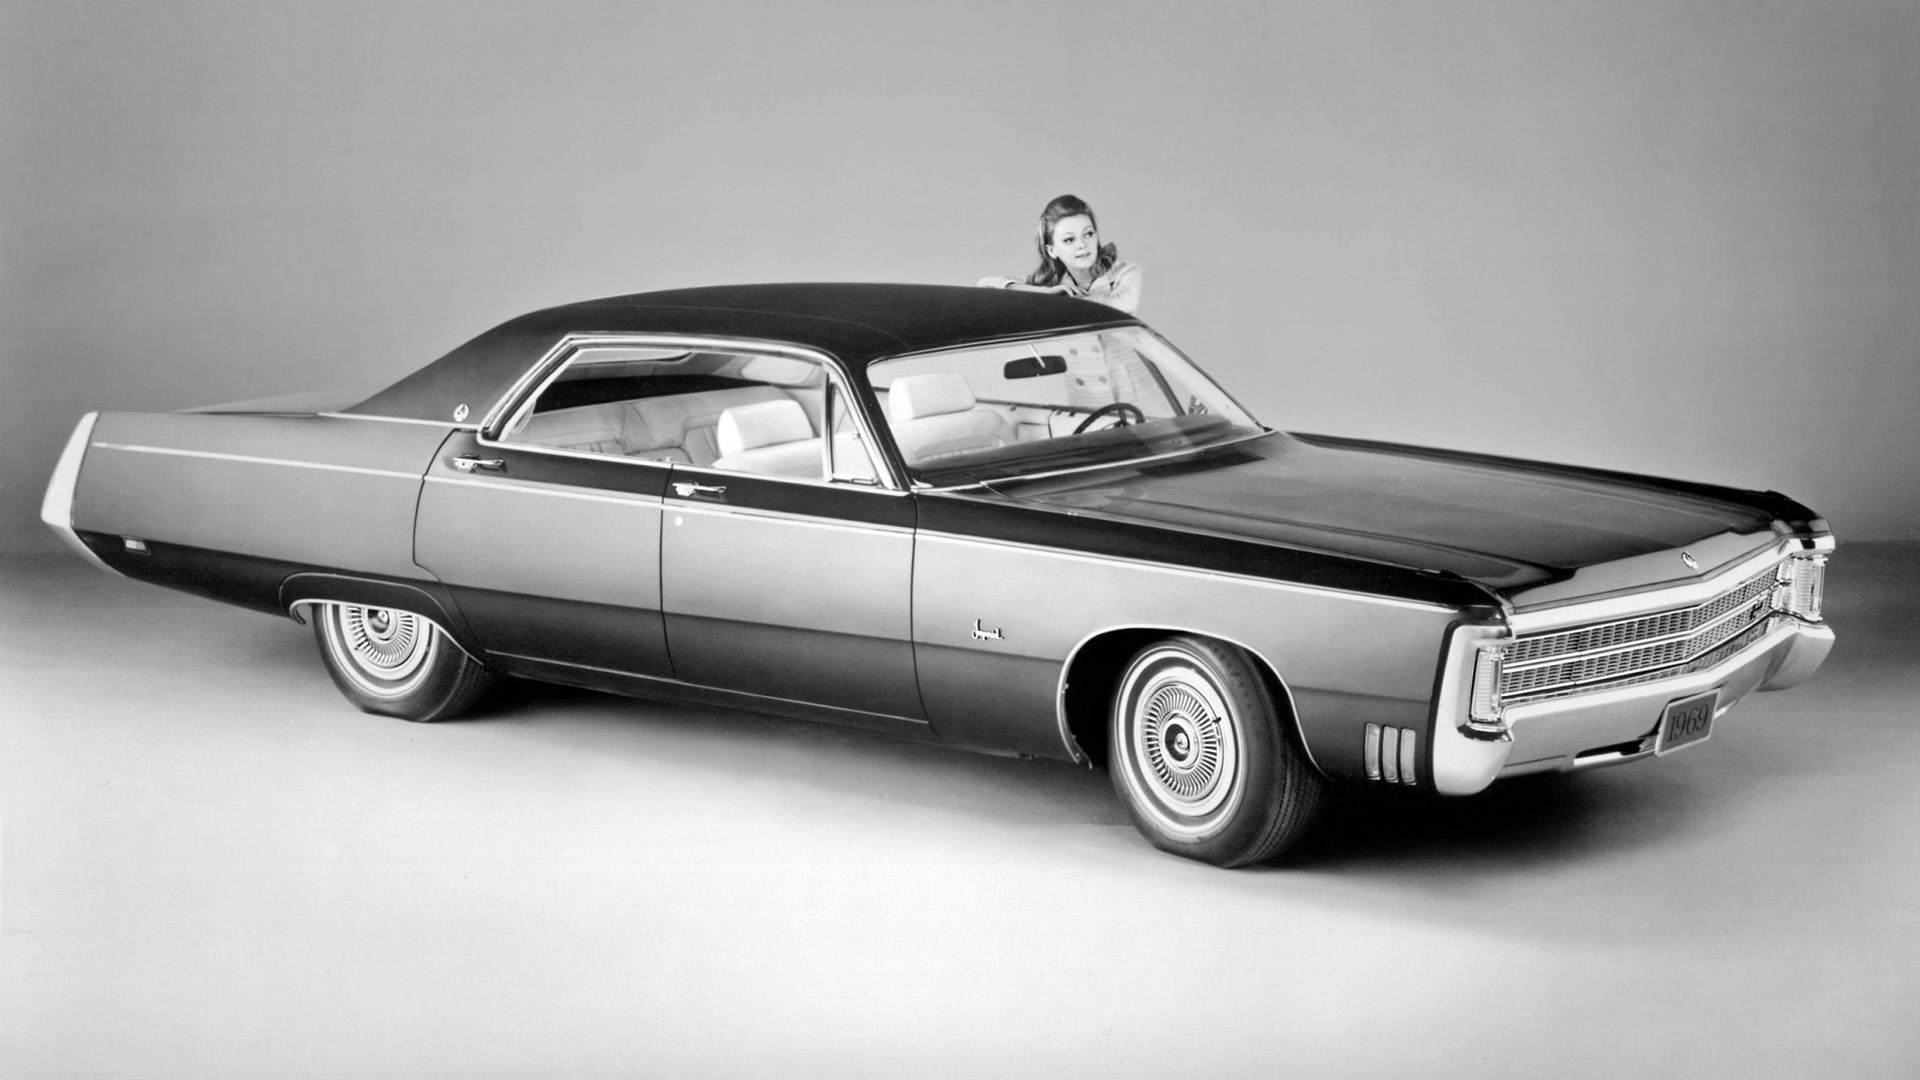 <p>Chrysler had used the Imperial name since the 1920s, but between 1955 and 1975 it created a standalone marque to rival Cadillac and Lincoln. Life was tough for the third-generation range of Imperial models, as being based on Chrysler platforms and bodyshells placed them at a disadvantage against other luxury brands.</p> <p>Instead, Imperial had to compete on features like the standard 7.2-liter (440-cubic inch) V8 engine with 350hp, or bench seating described as being like a sumptuous sofa – finished in cloth and vinyl.</p>